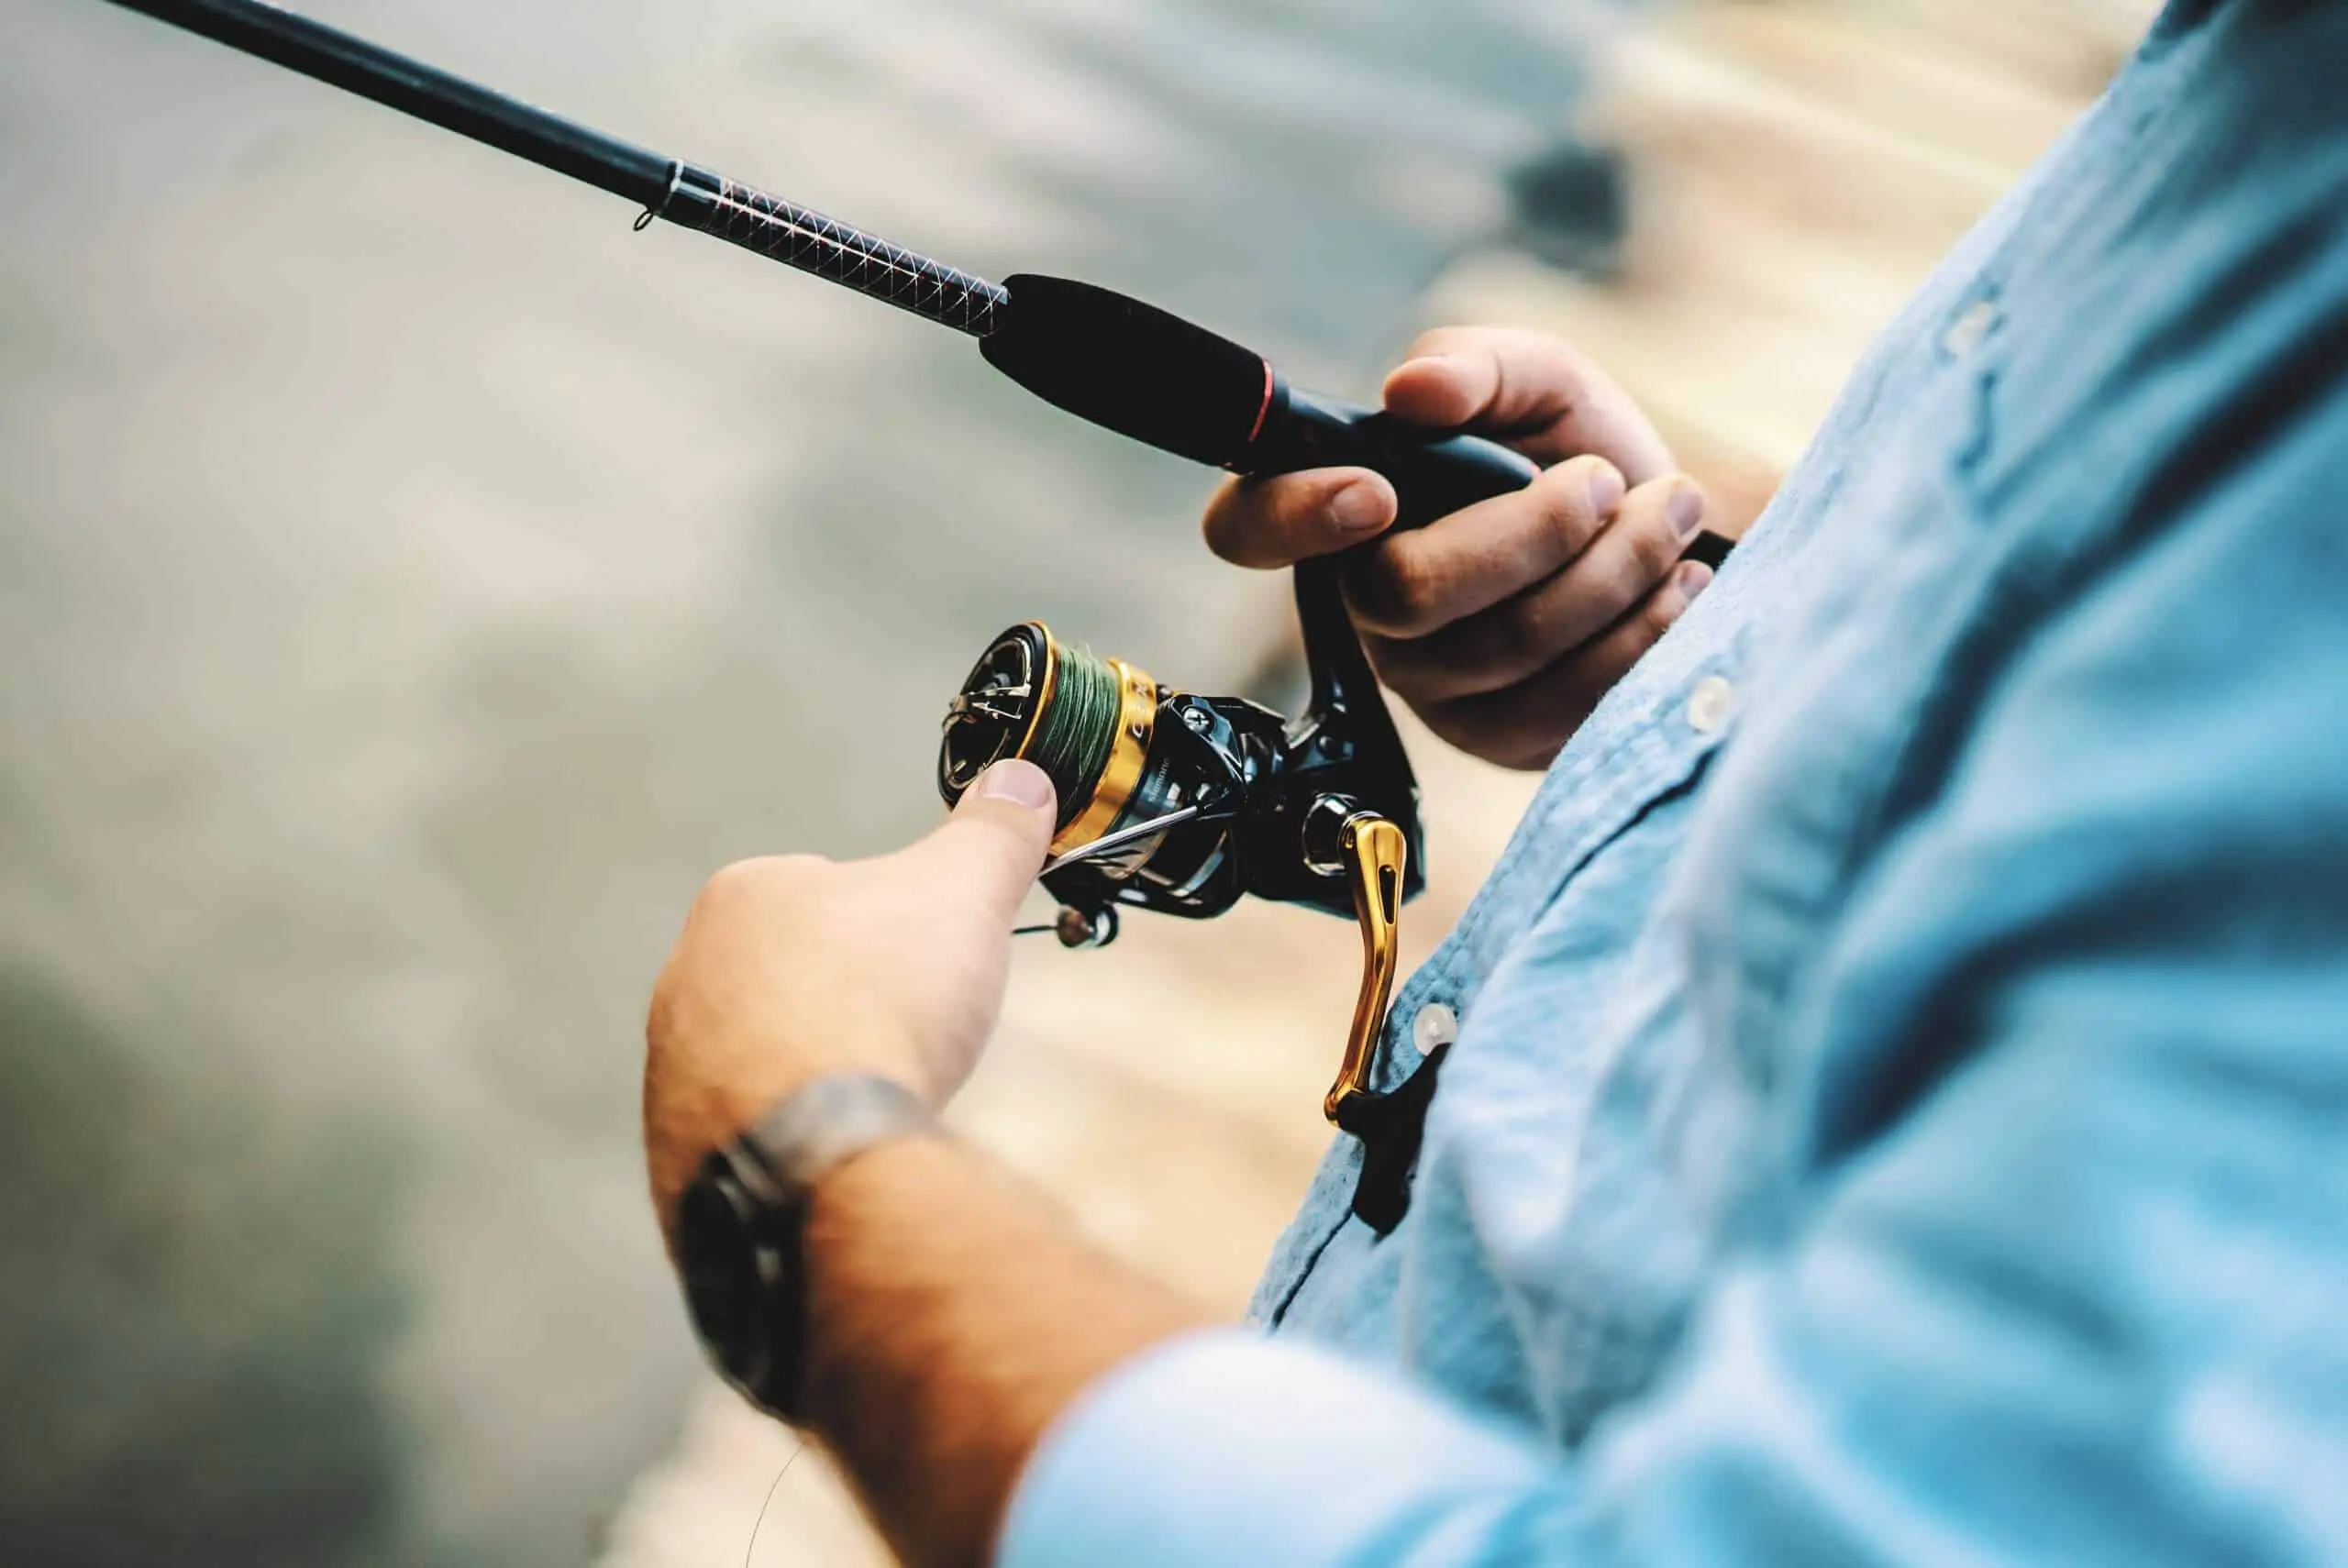 Man in blue shirt using one of the best spinning reel under 50$ in gold